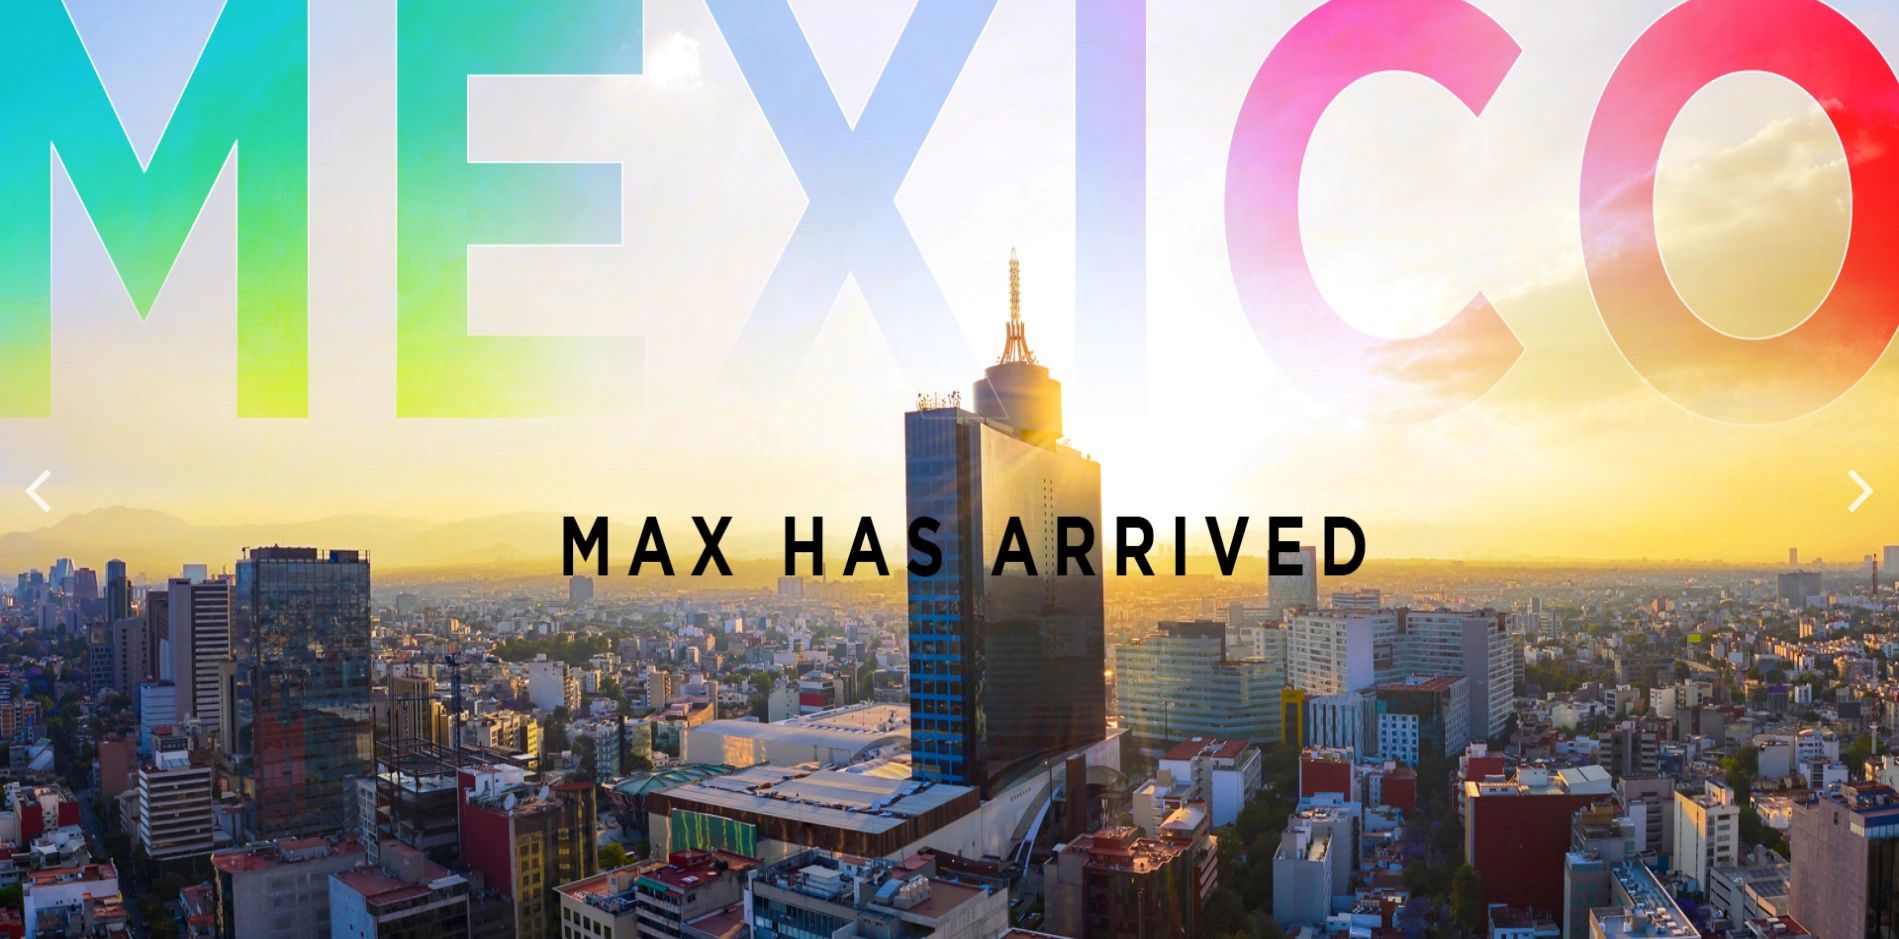 Max has arrived in Mexico!